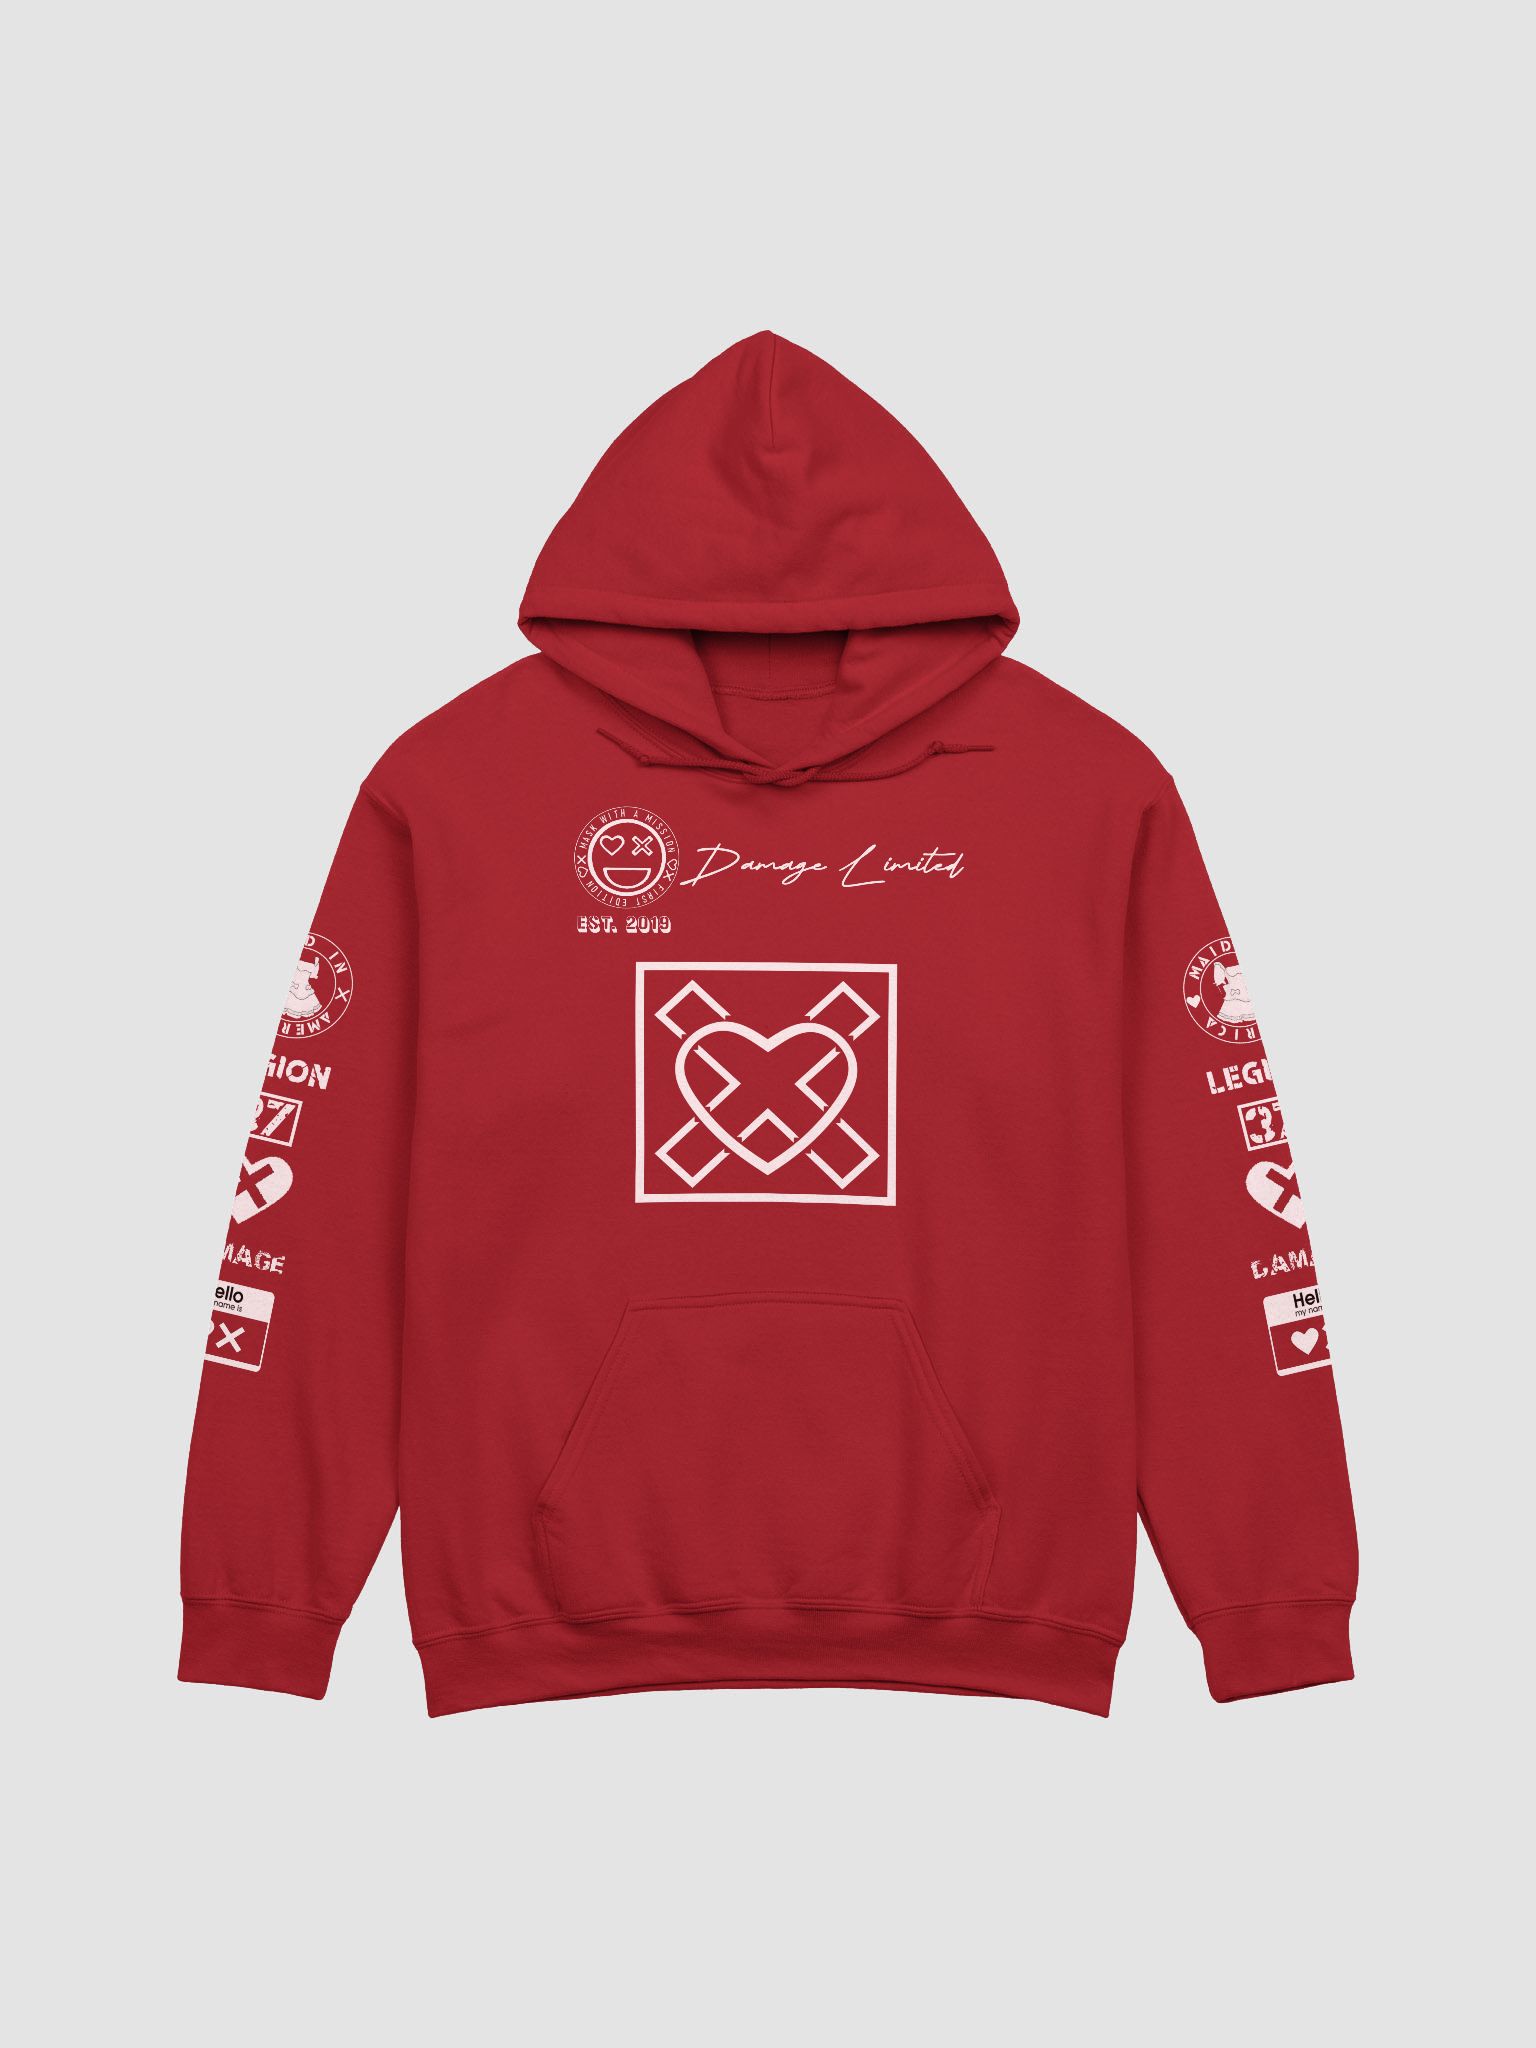 Damage Limited First Edition Hoodie | Damage